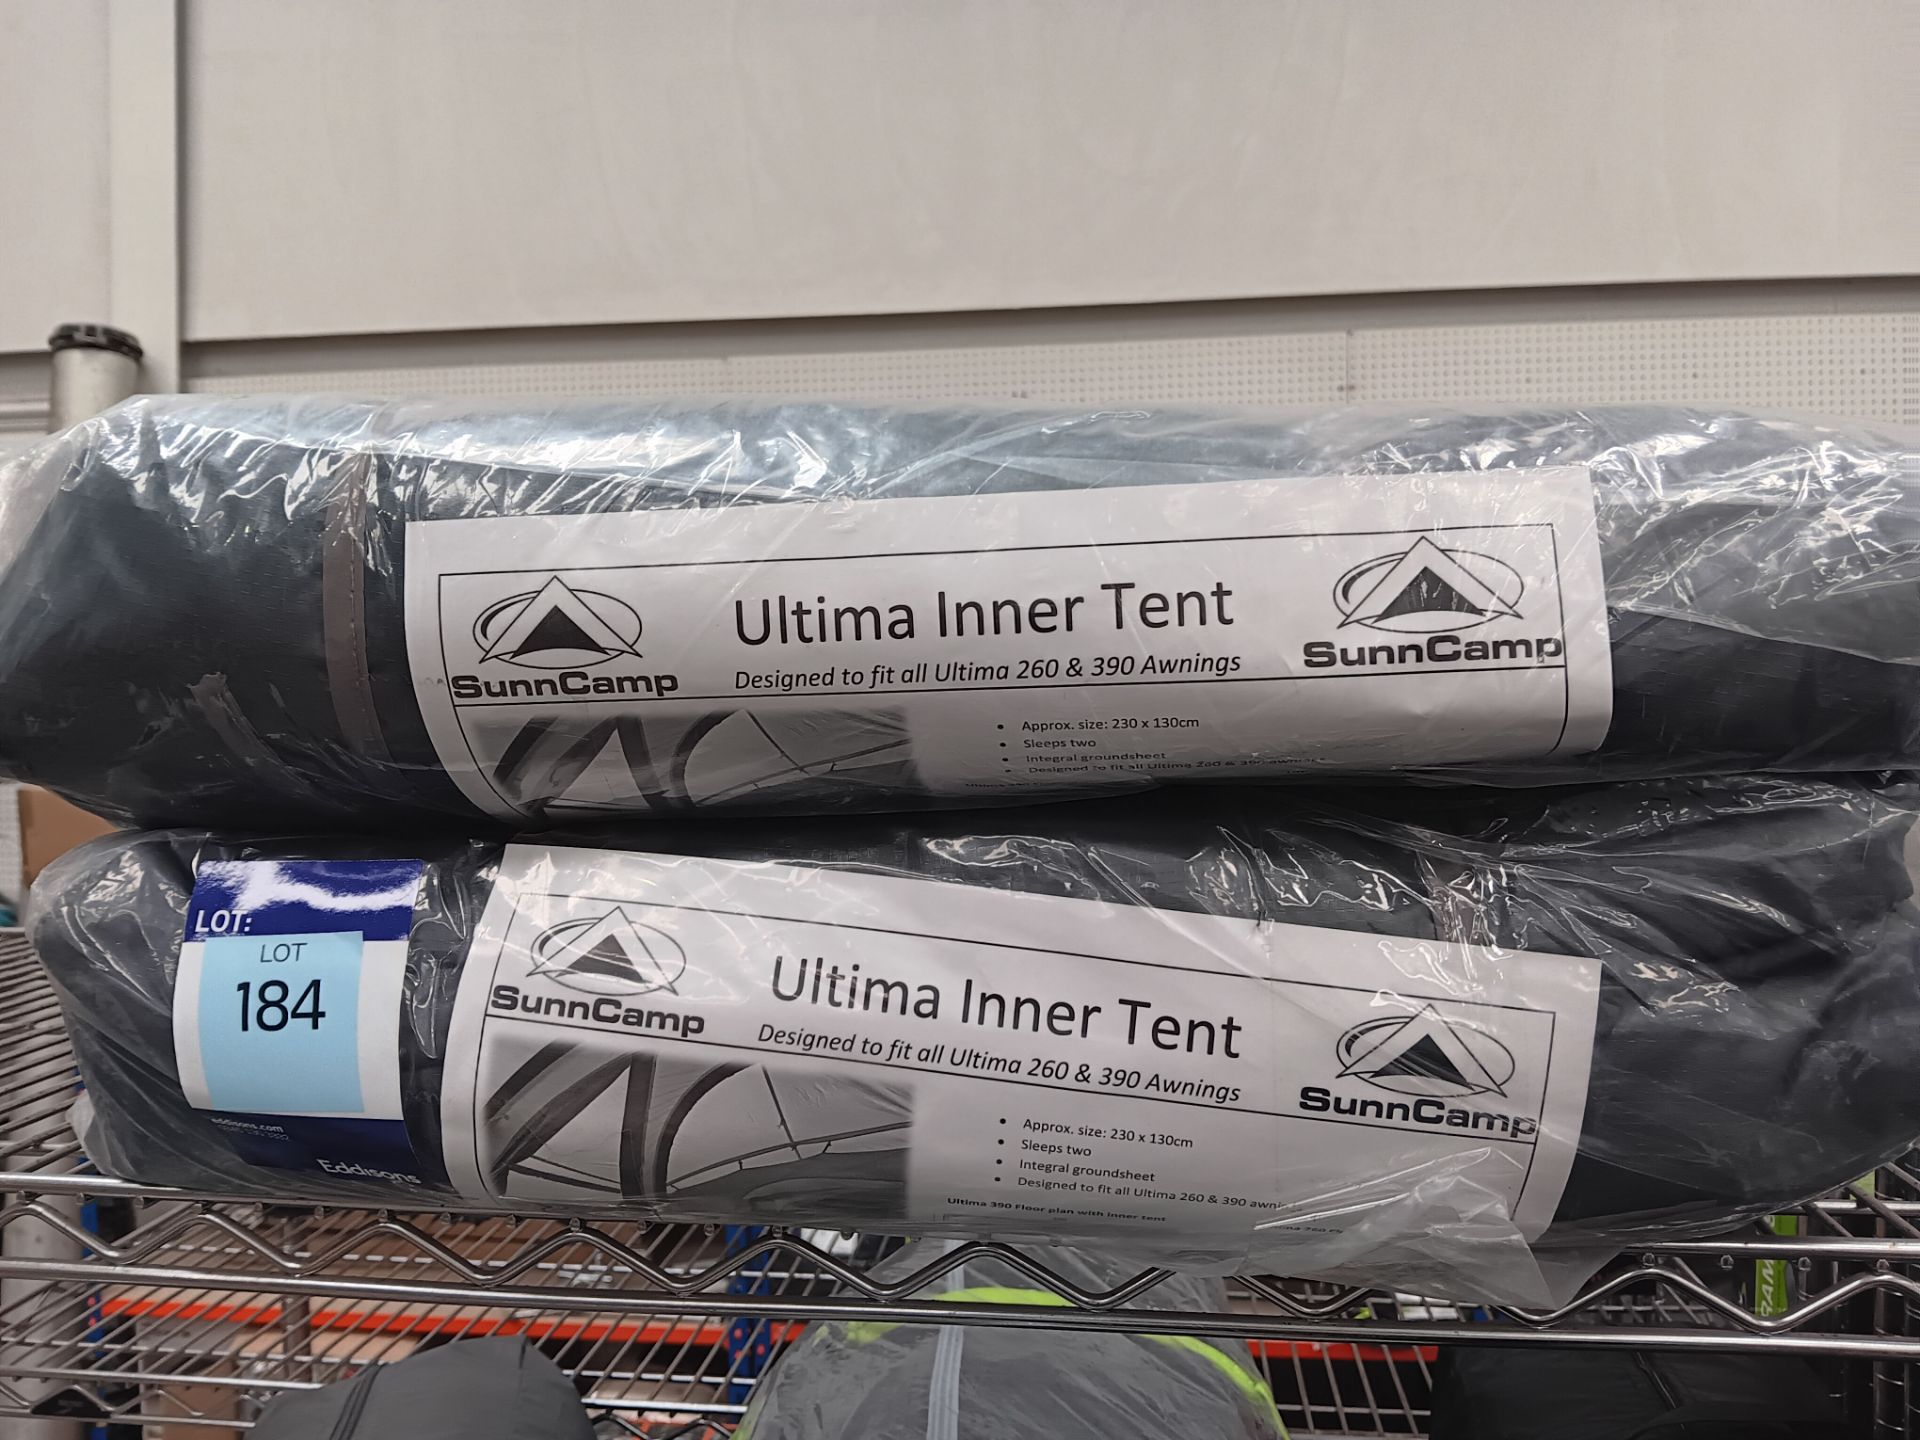 2 x Sunncamp Ultima Innter Tent (Please note, Viewing Strongly Recommended - Eddisons have not